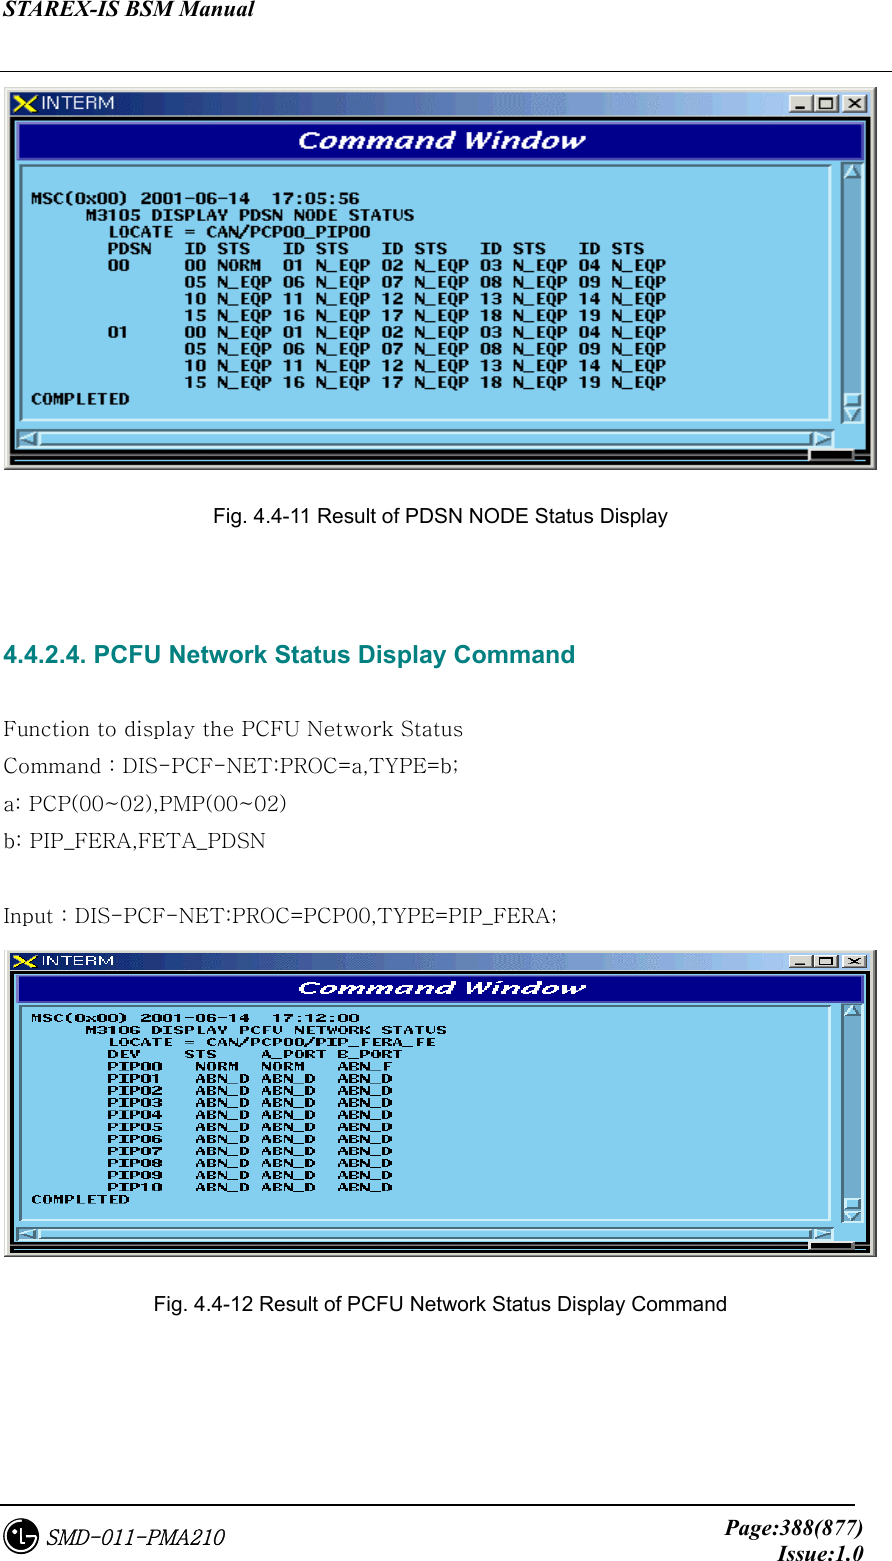 STAREX-IS BSM Manual     Page:388(877)Issue:1.0SMD-011-PMA210  Fig. 4.4-11 Result of PDSN NODE Status Display   4.4.2.4. PCFU Network Status Display Command  Function to display the PCFU Network Status Command : DIS-PCF-NET:PROC=a,TYPE=b; a: PCP(00~02),PMP(00~02) b: PIP_FERA,FETA_PDSN  Input : DIS-PCF-NET:PROC=PCP00,TYPE=PIP_FERA;  Fig. 4.4-12 Result of PCFU Network Status Display Command   